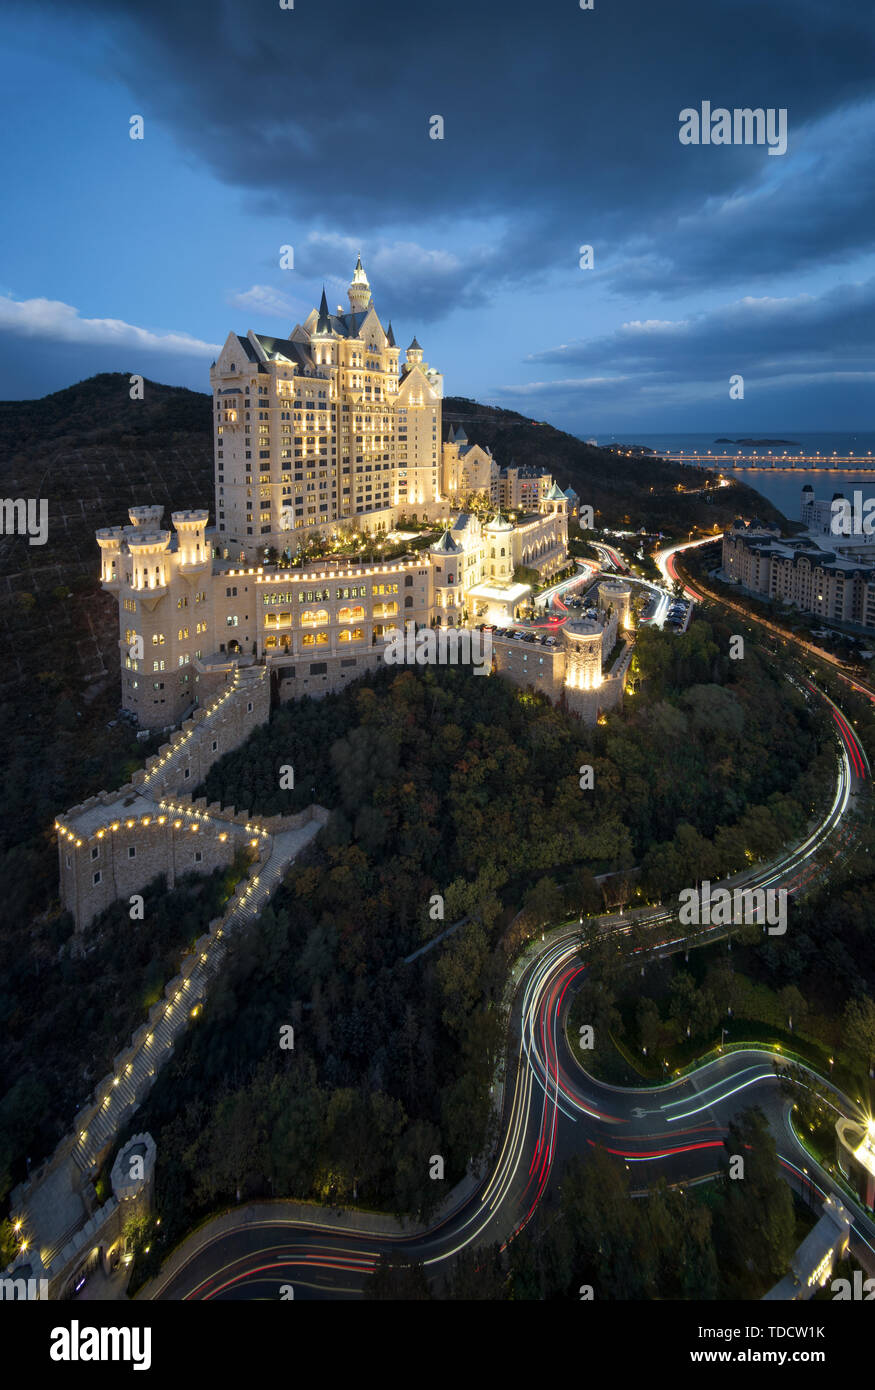 A castle on the side of Dalian Stock Photo